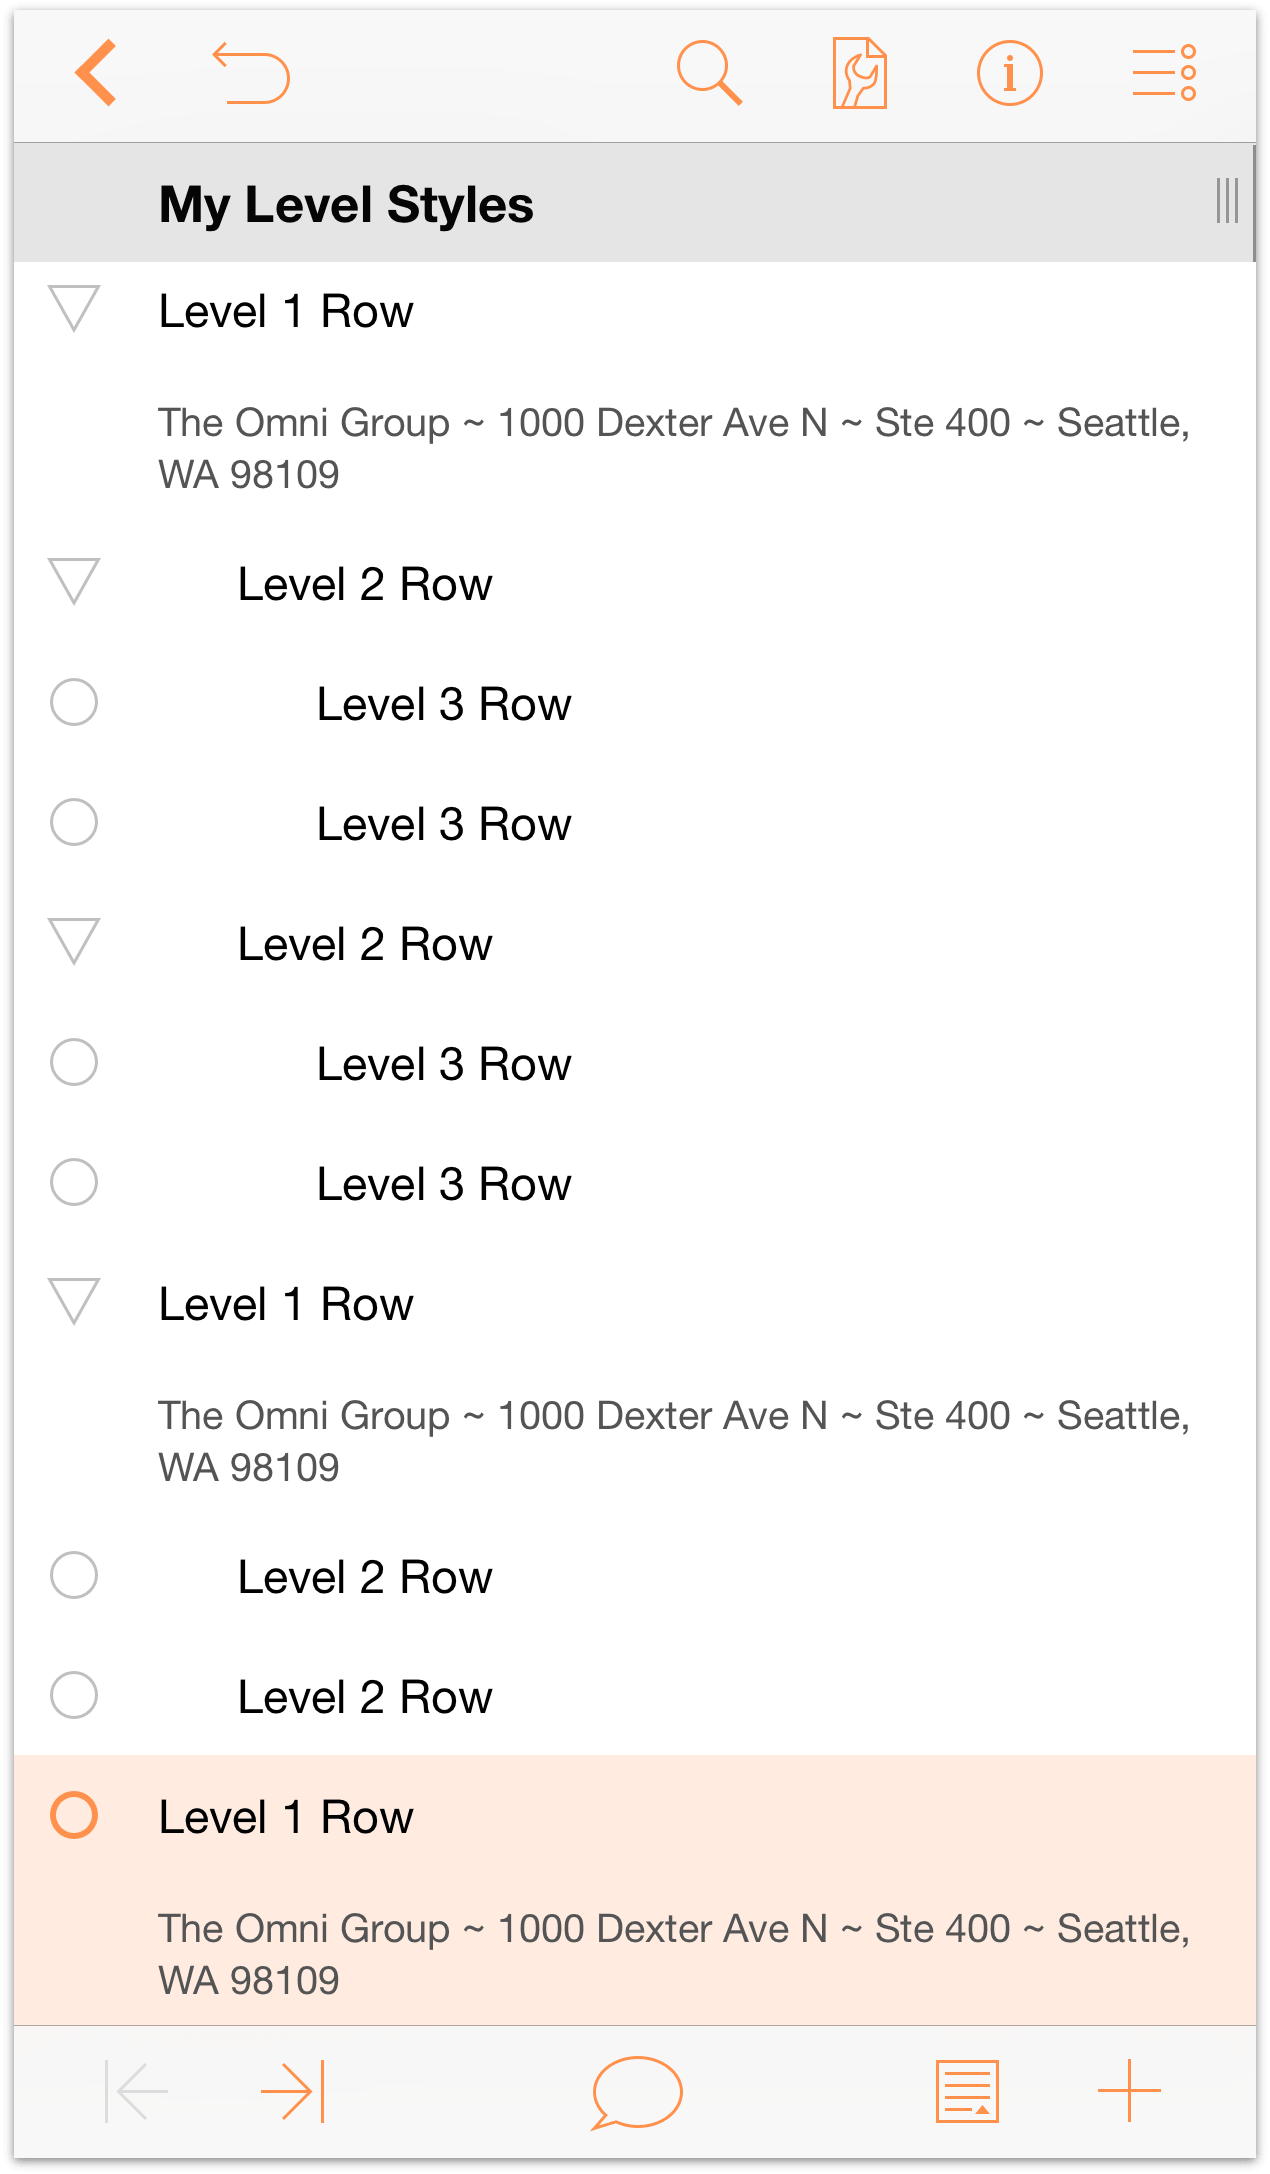 Enter some text as Notes for the Level 1 Rows